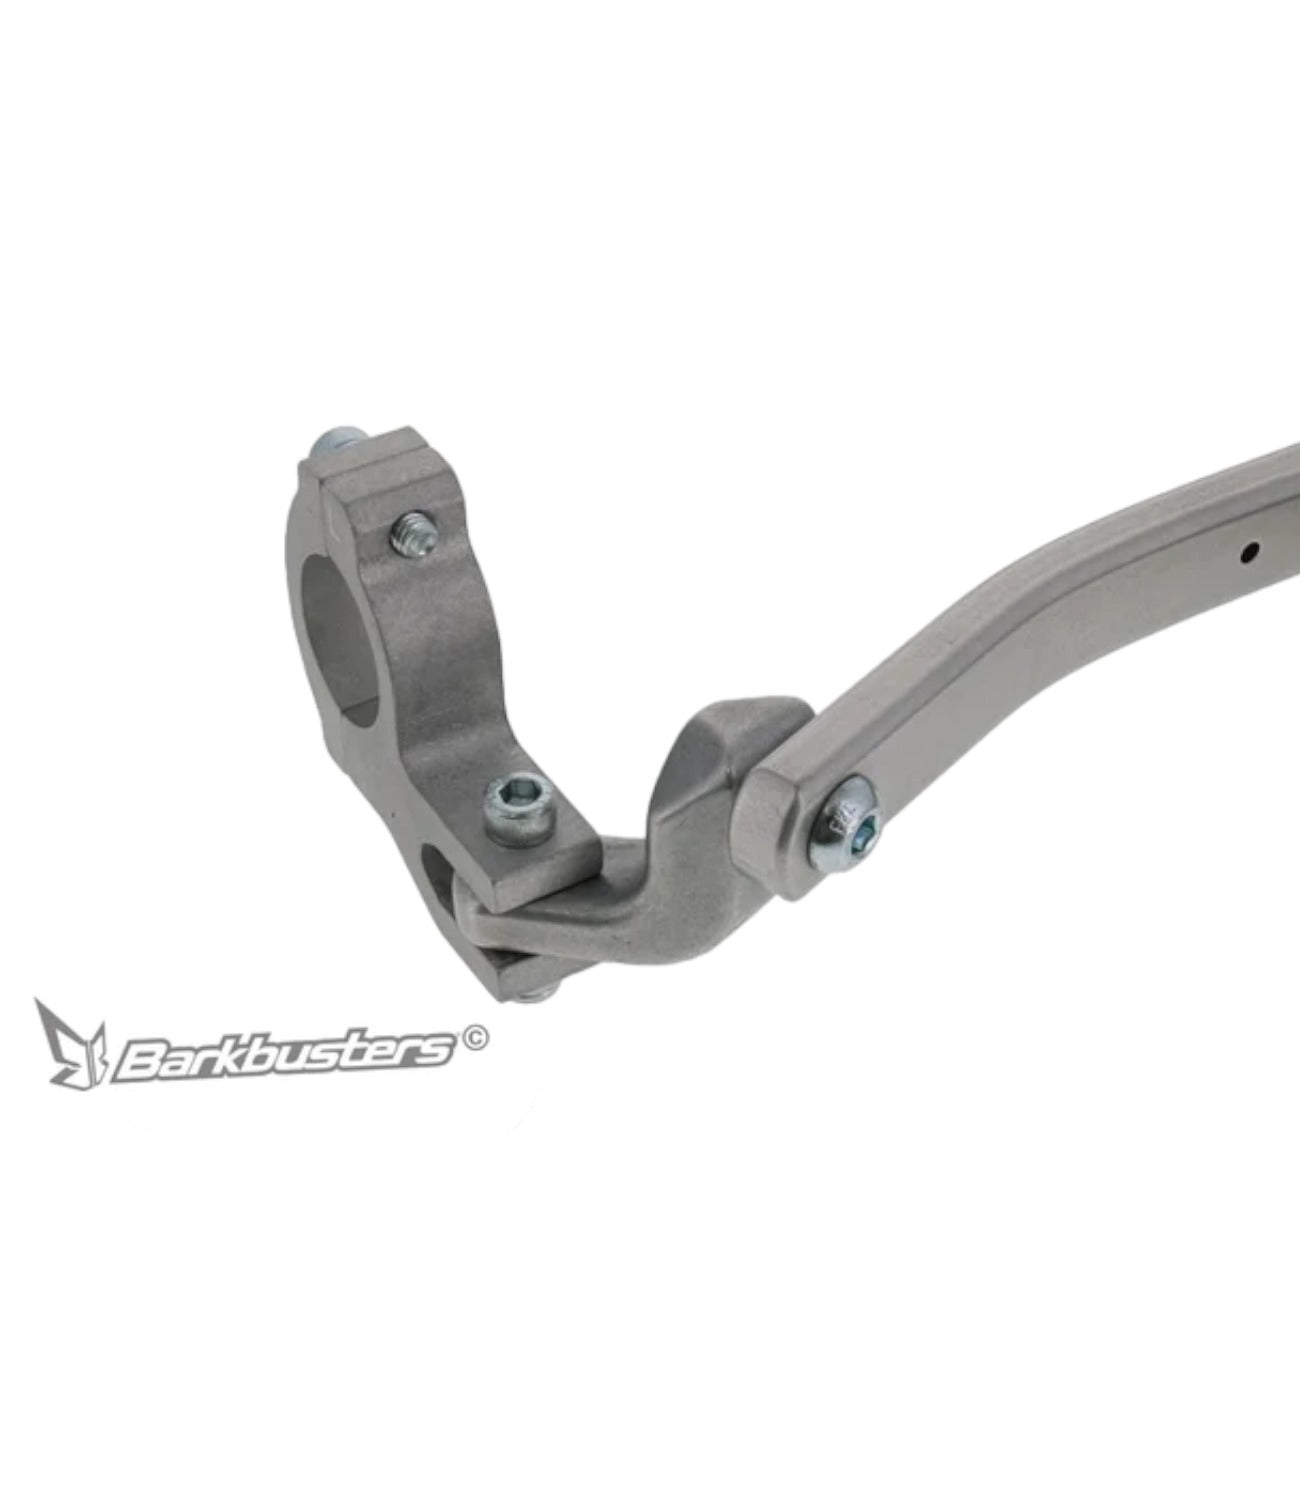 Barkbusters - Two Point Handguard Hardware Mount For Triumph Tiger 660 Sport